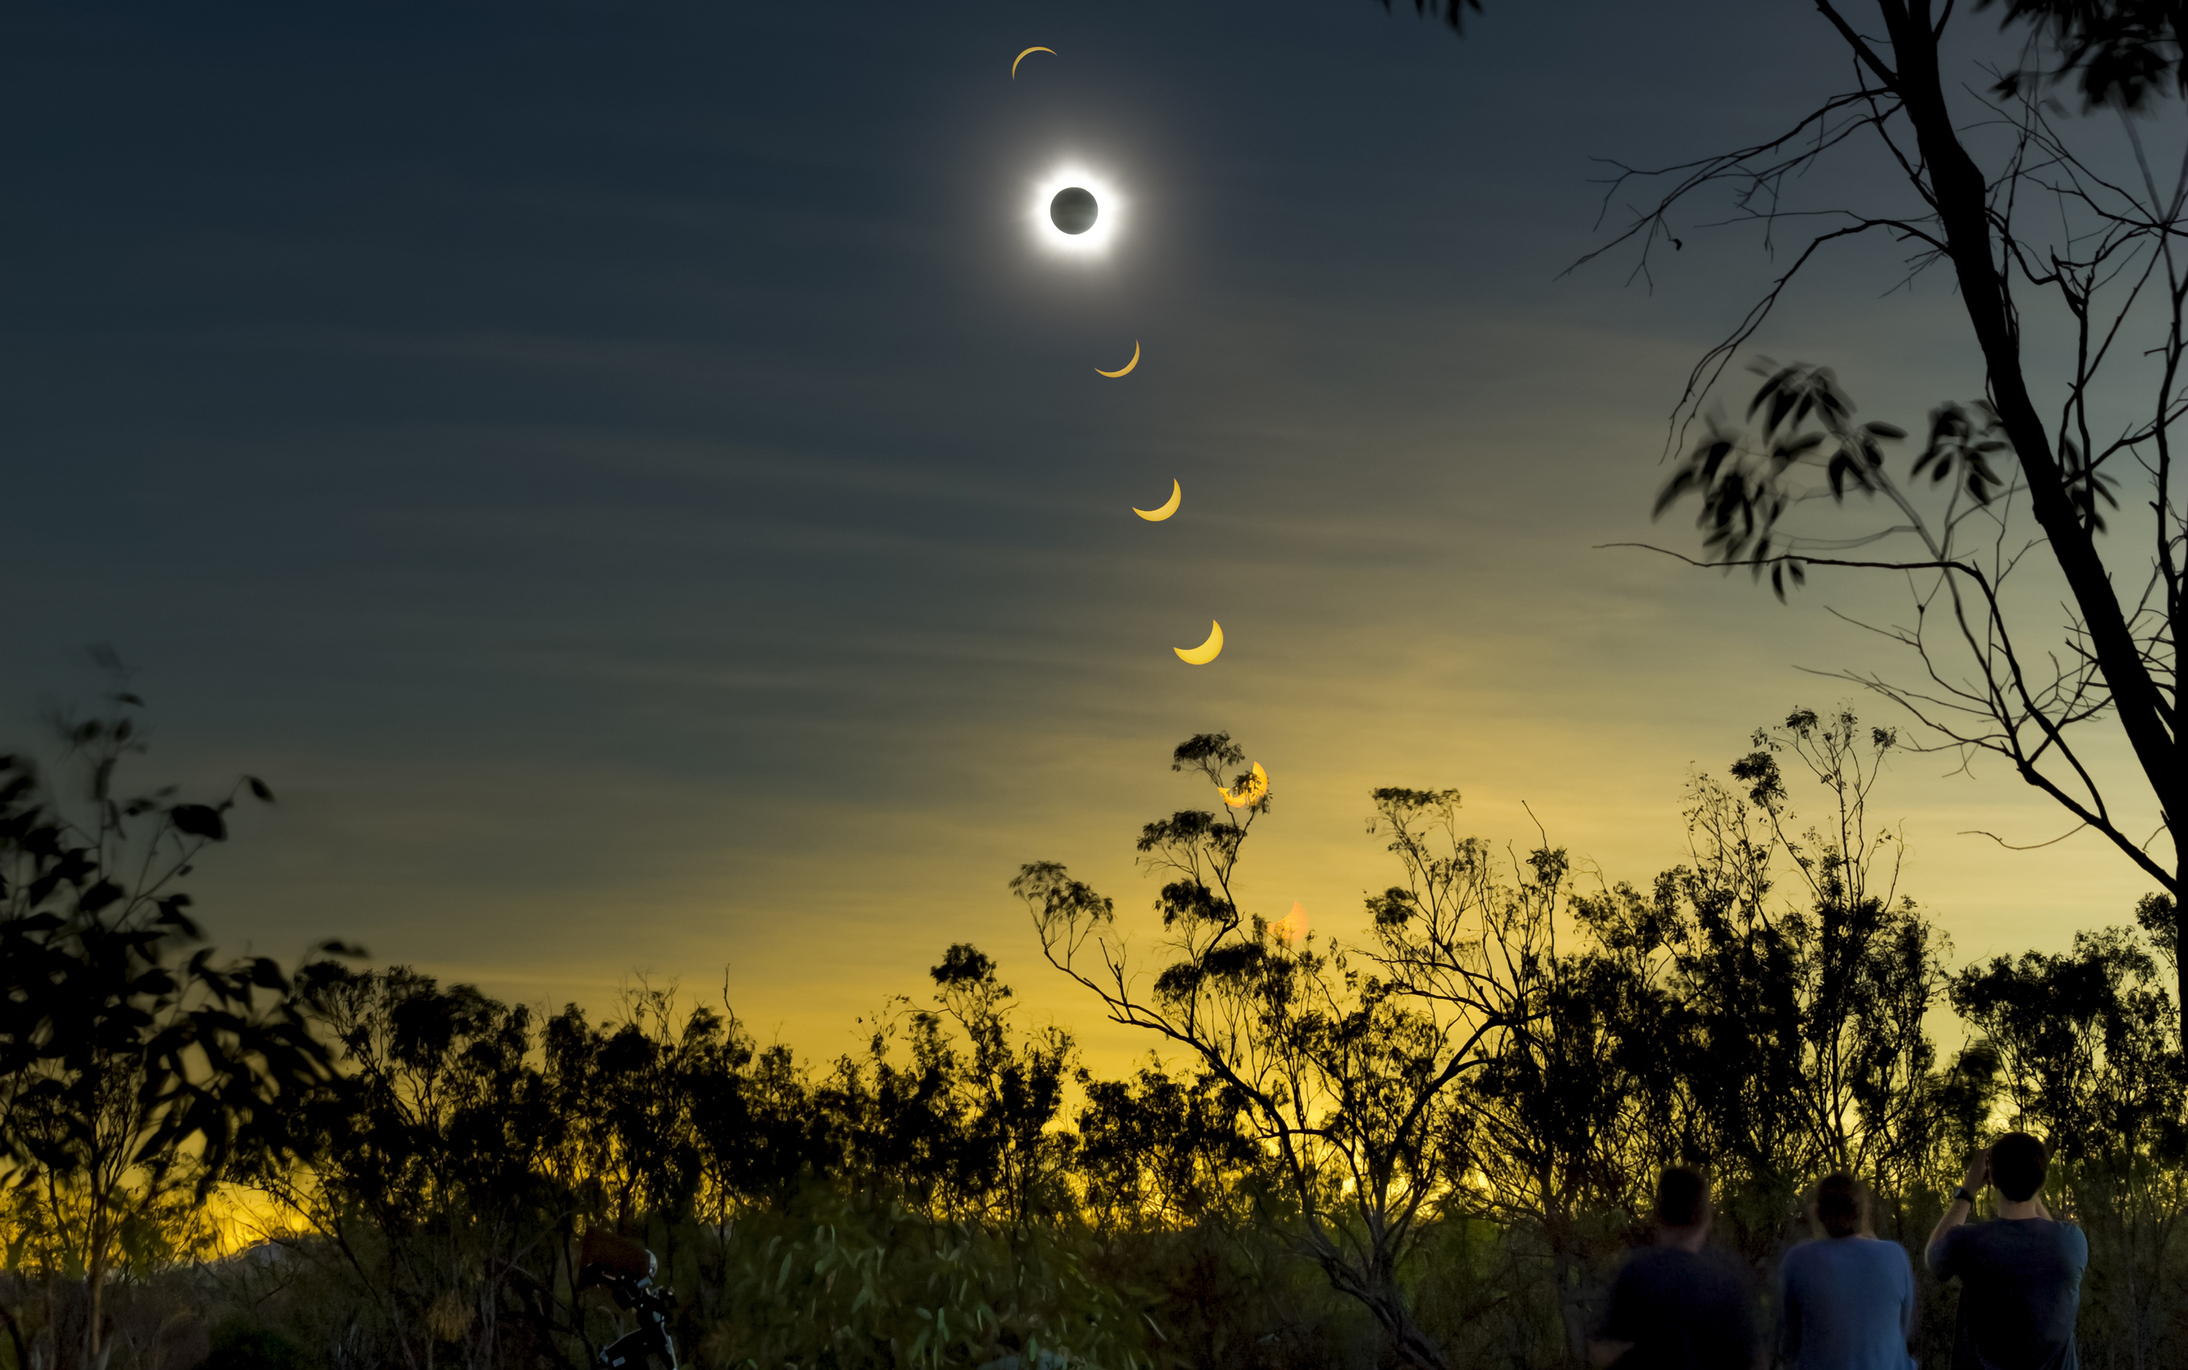 Solar eclipse sequence over a silhouette of trees with onlookers